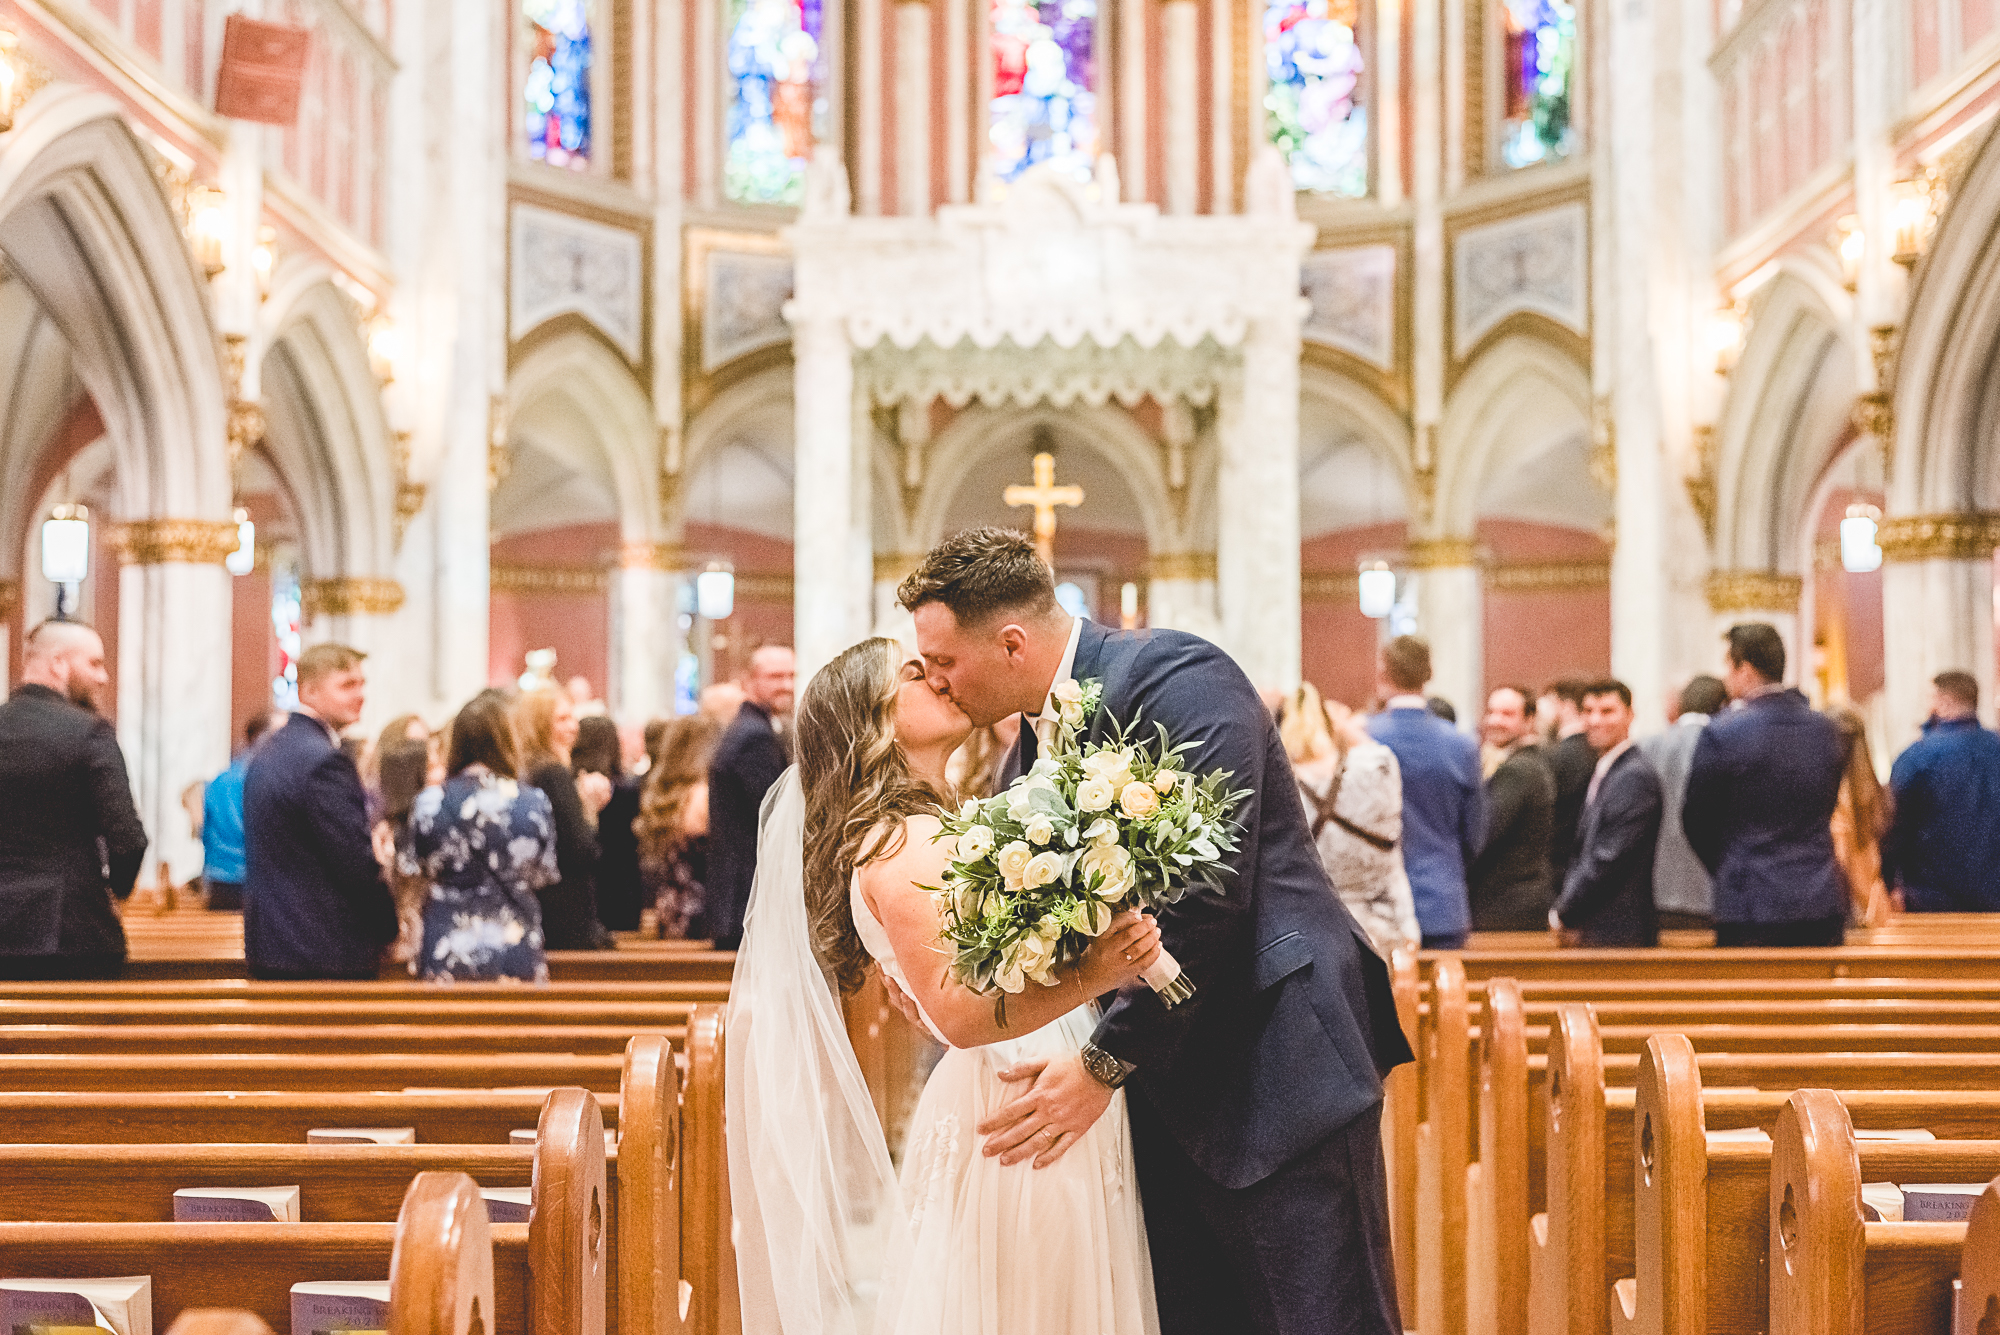 Wedding ceremony in a church in Bristol RI. Bride and groom kissing at the end of the aisle after the ceremony.